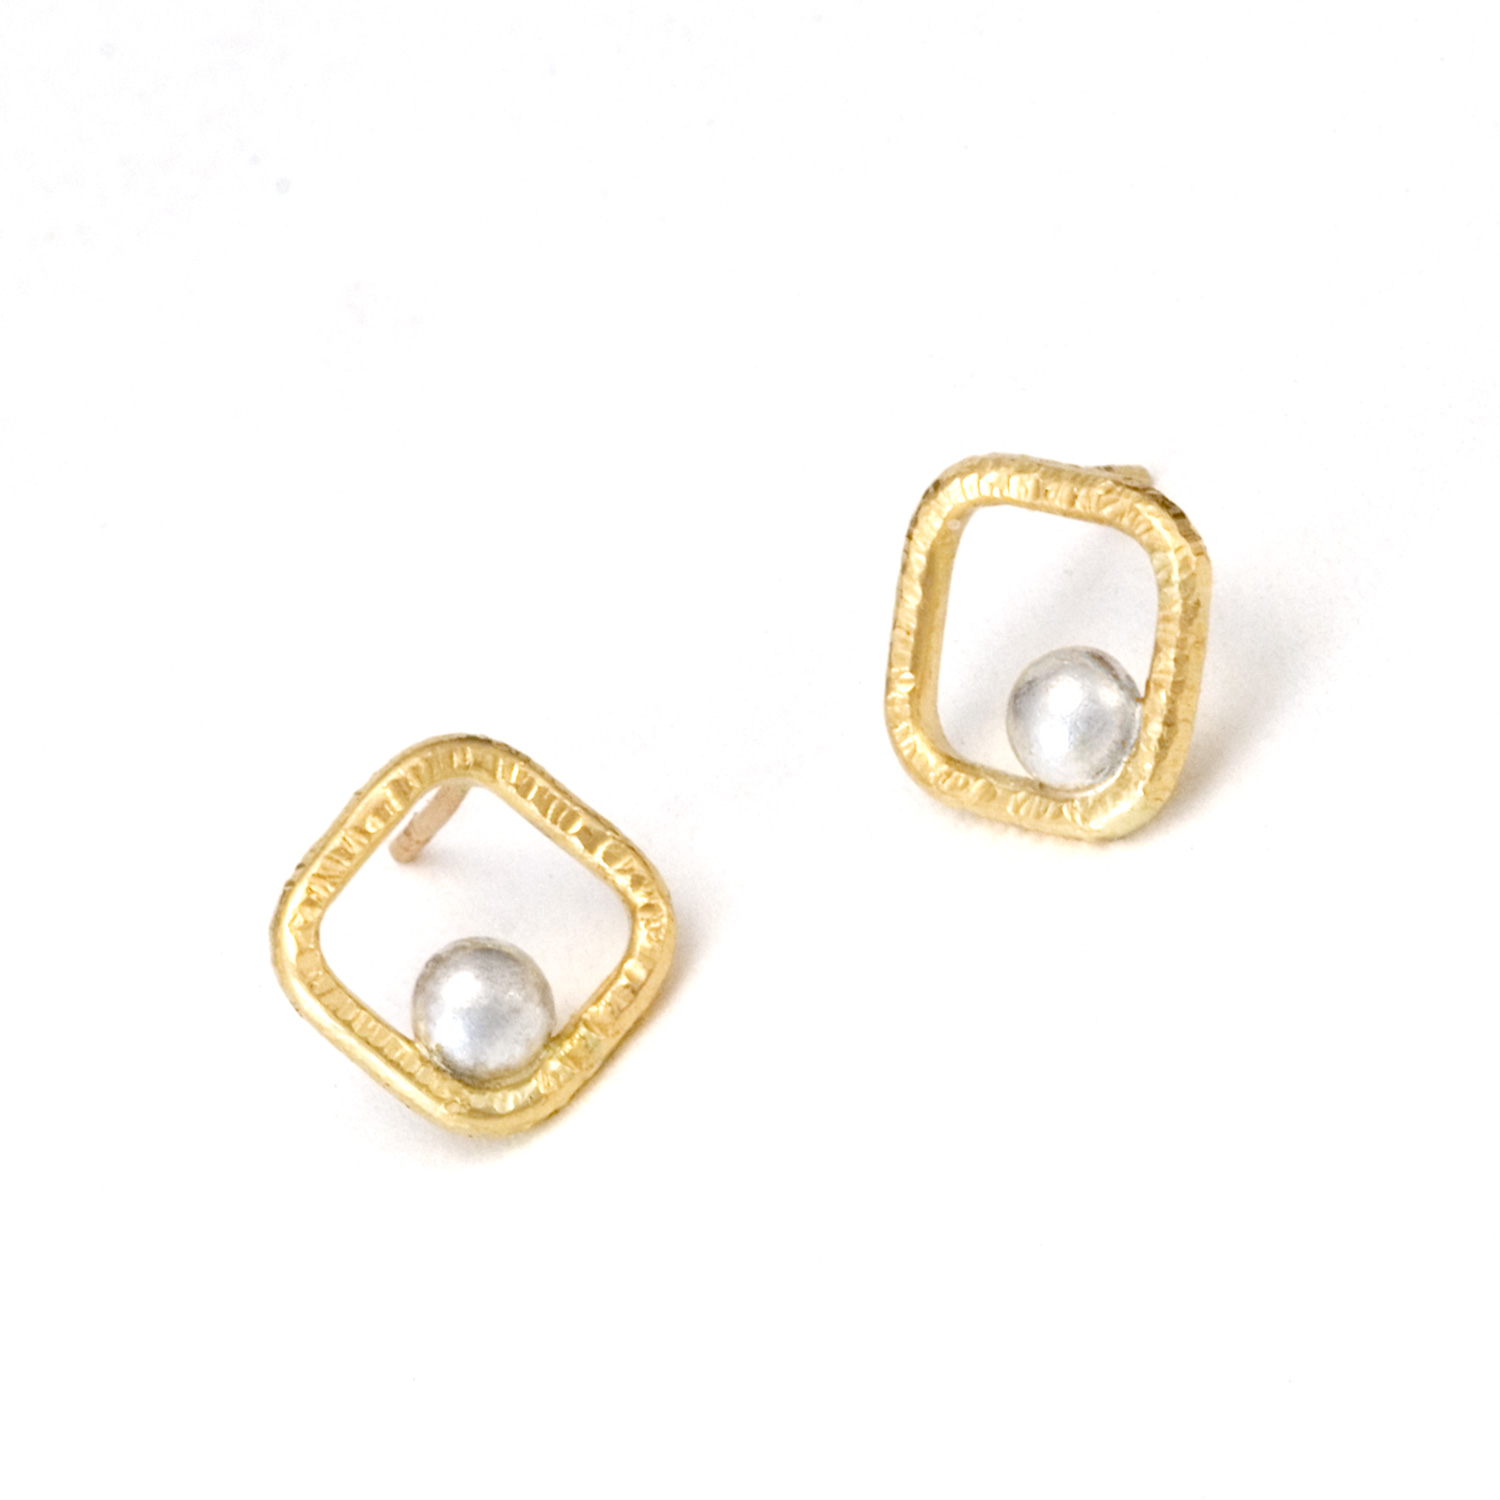 Forged Square Dot Earrings in 18k gold & sterling silver